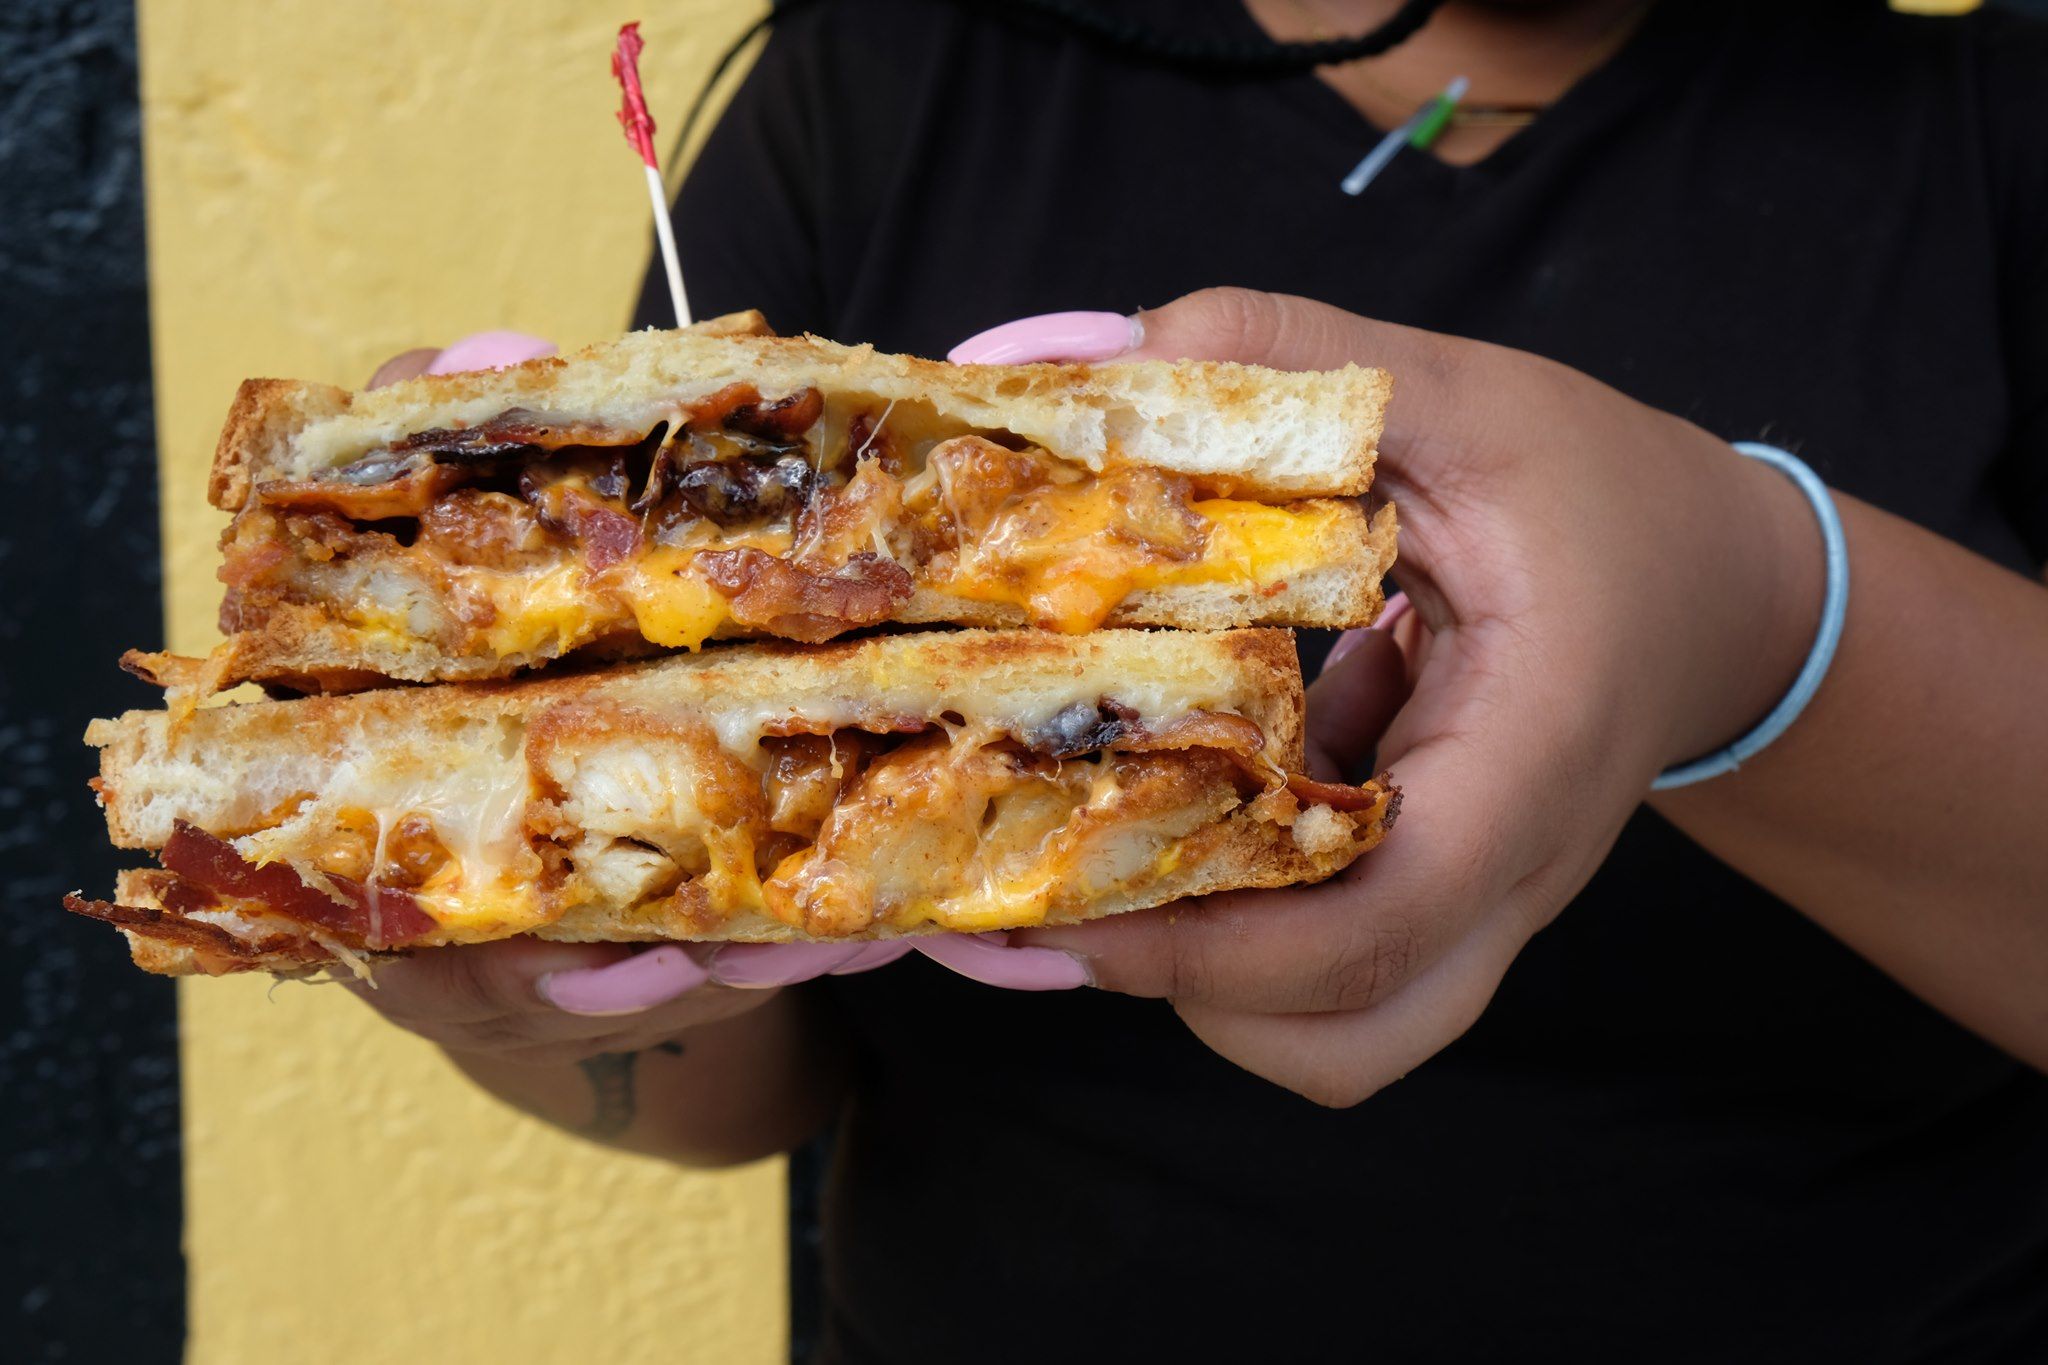 Say cheese: New York Grilled Cheese Co. brings you one of the best American food experiences with their own little twist.